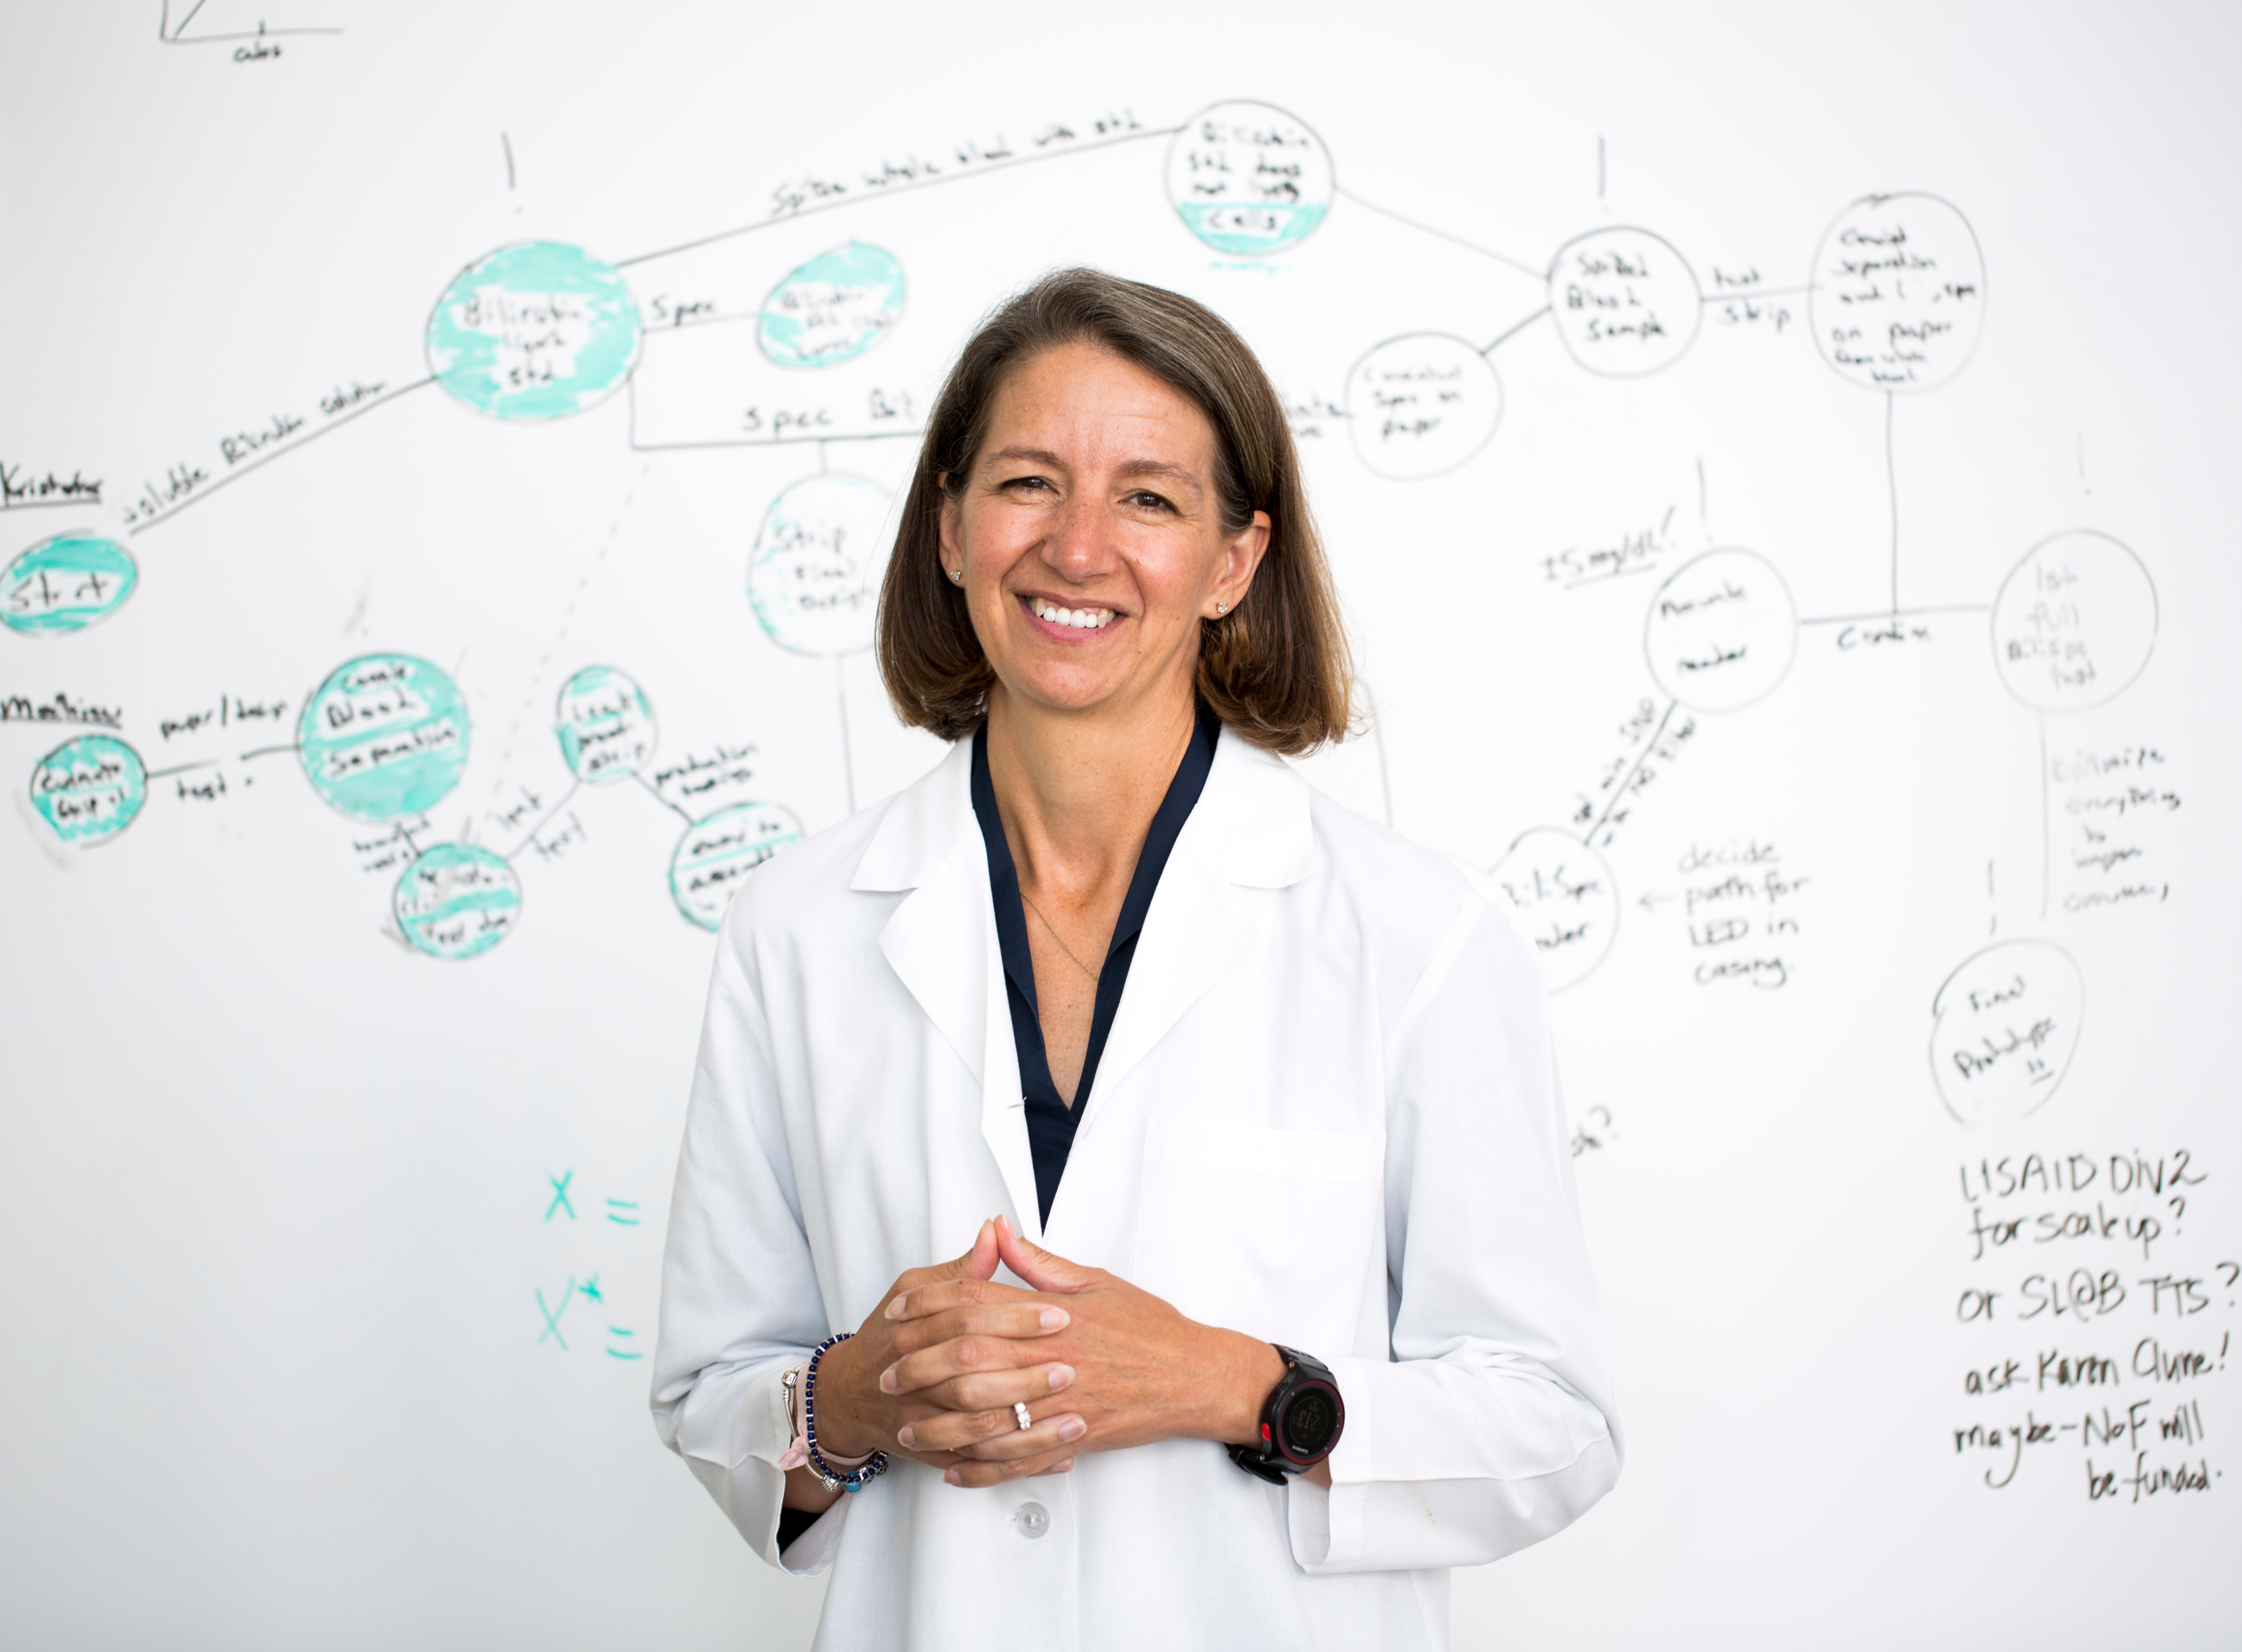 A woman with shoulder length brown hair writing on a white board in a lab.